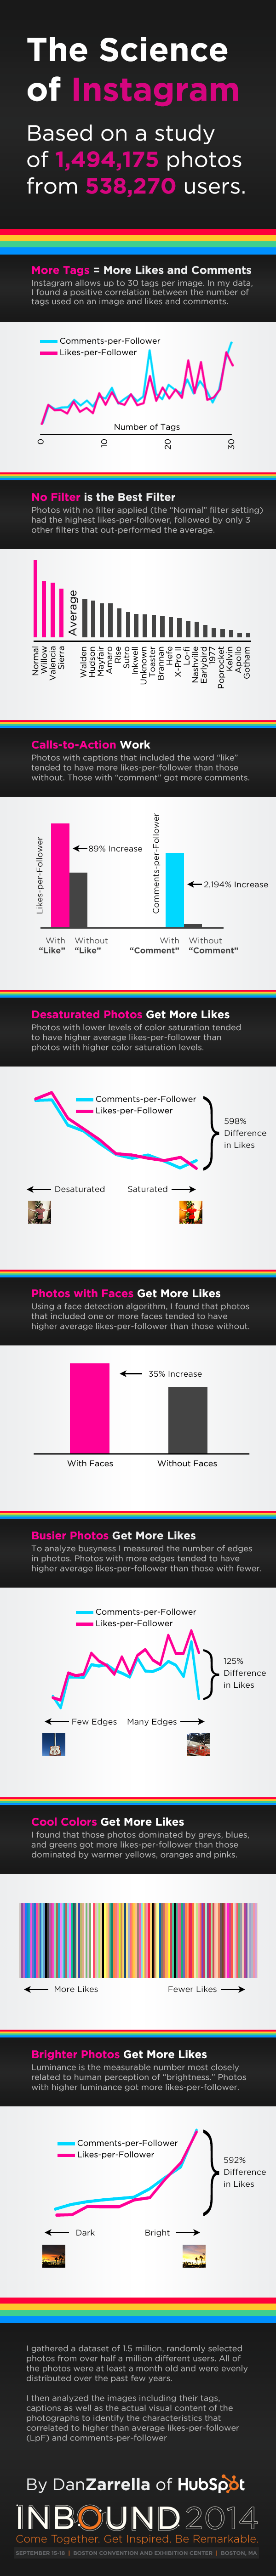 The Big Science of Instagram #infographic